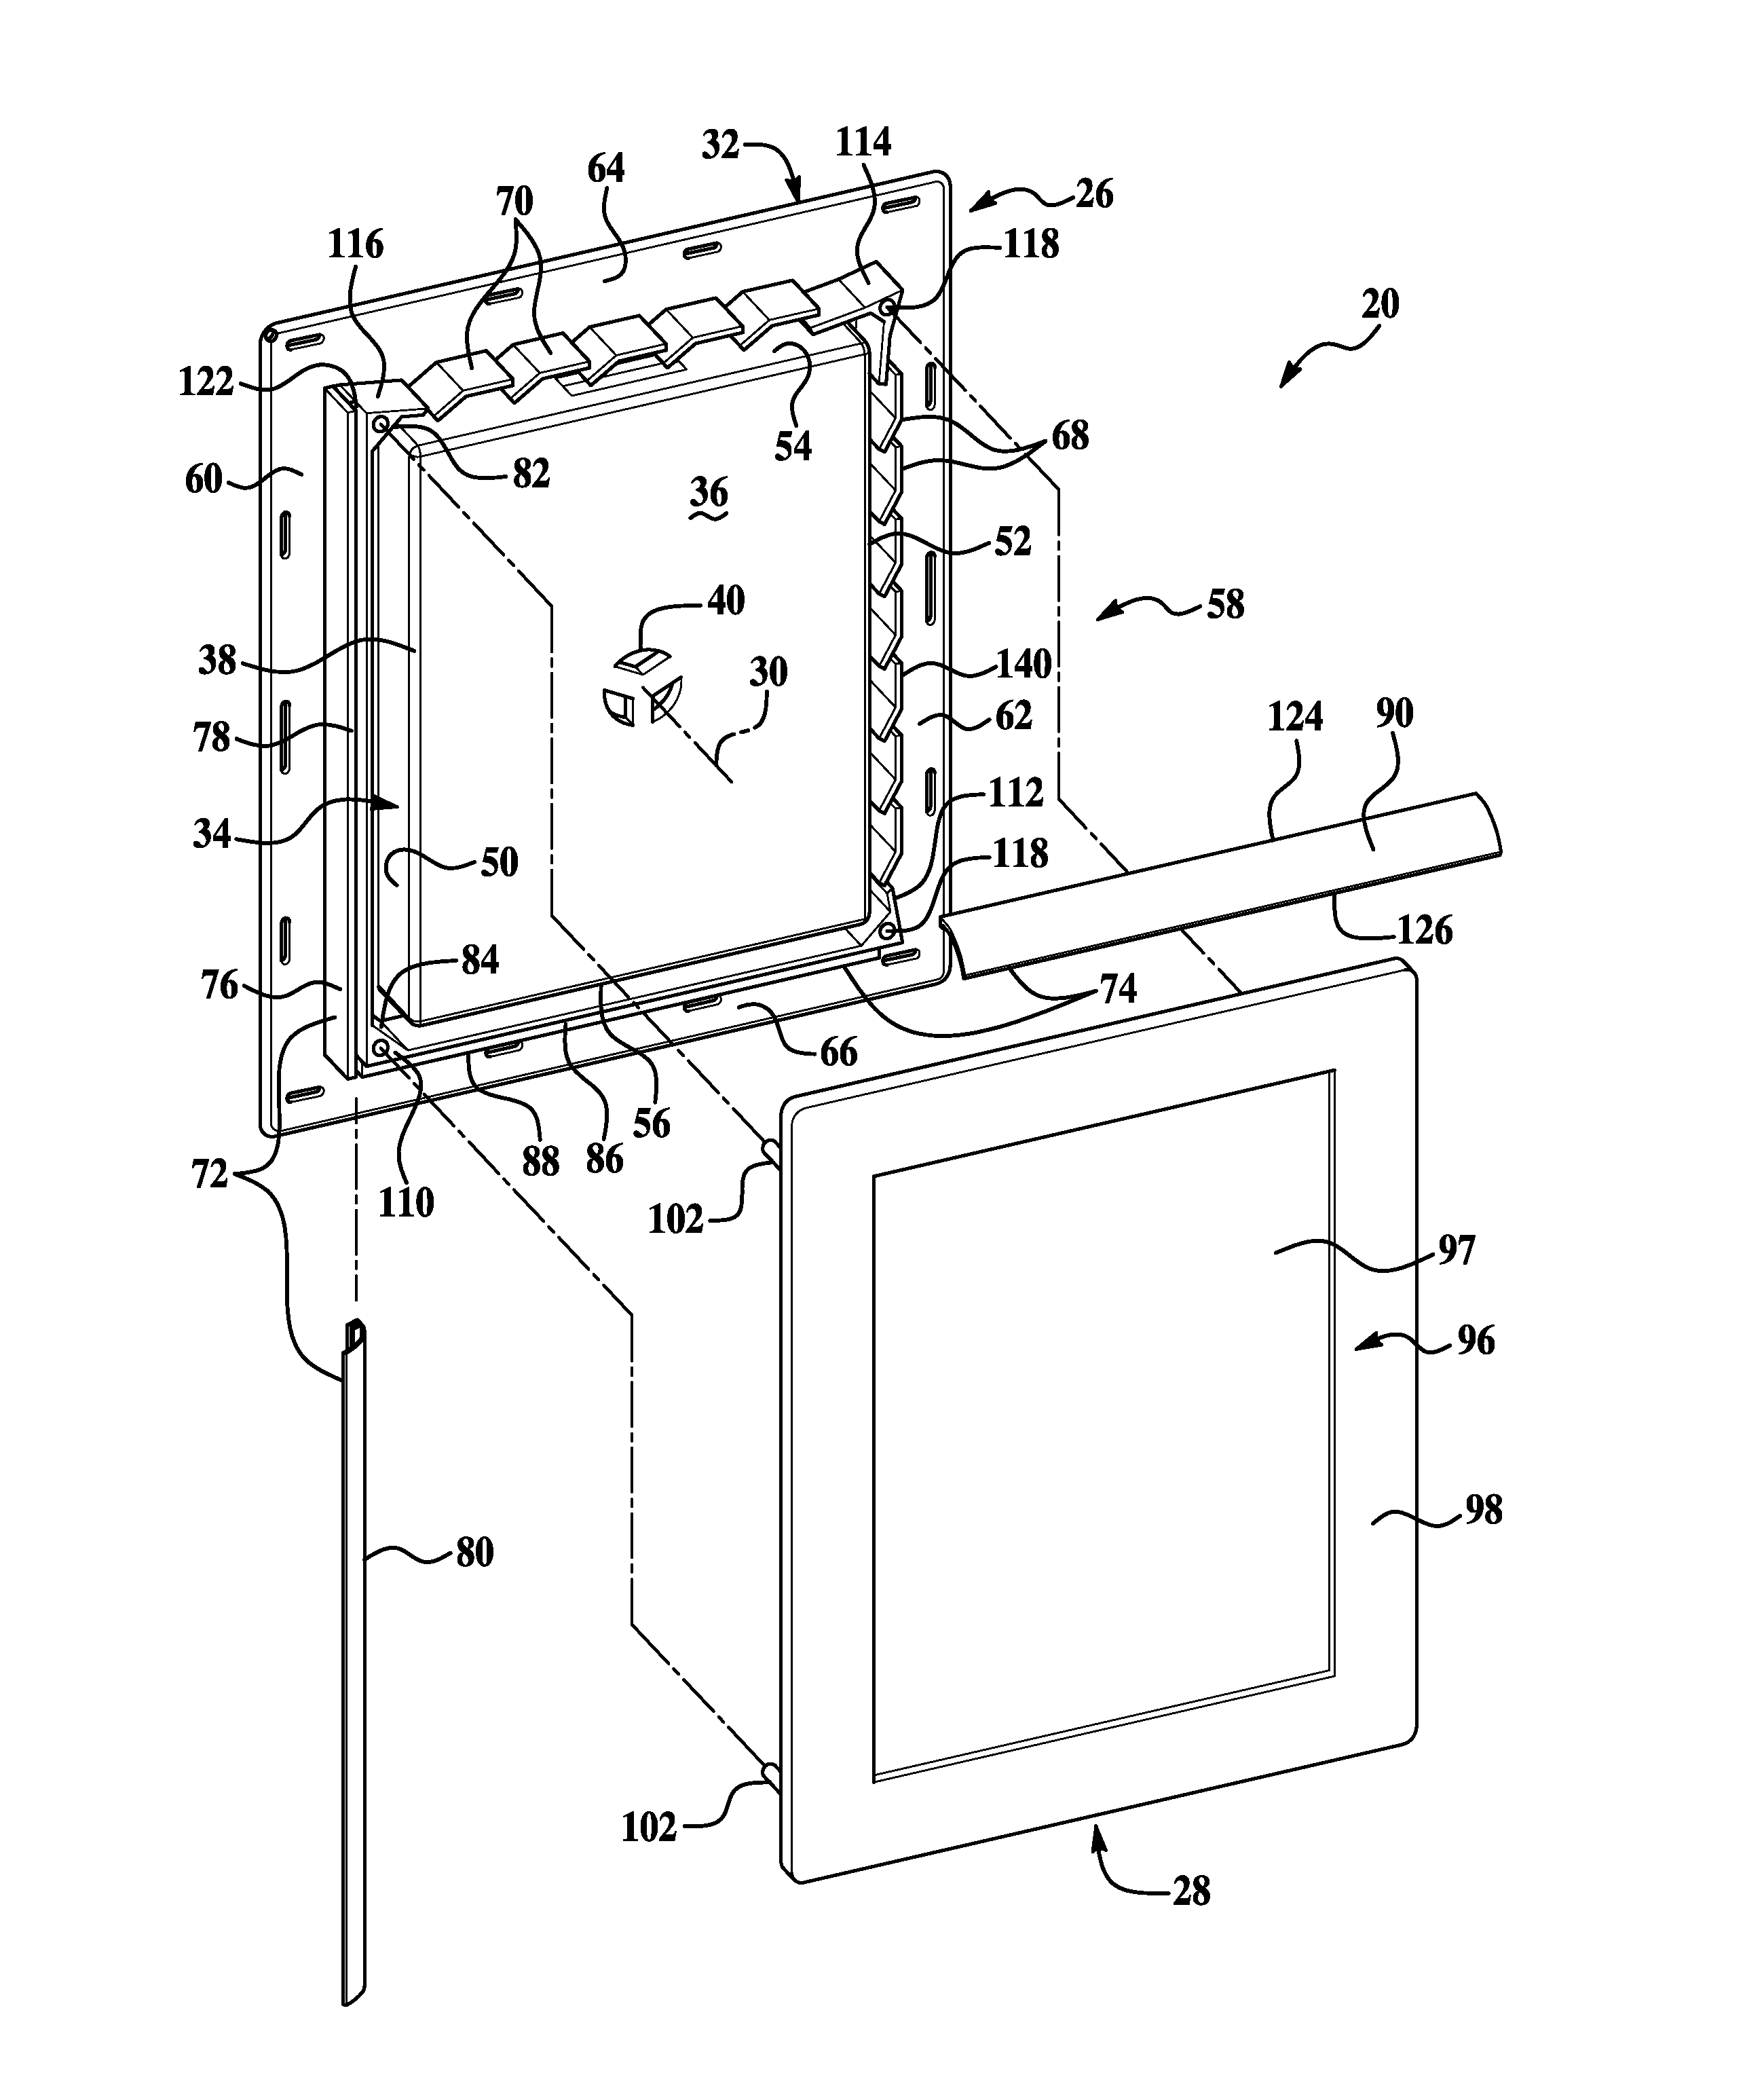 Adjustable mounting bracket assembly for exterior siding